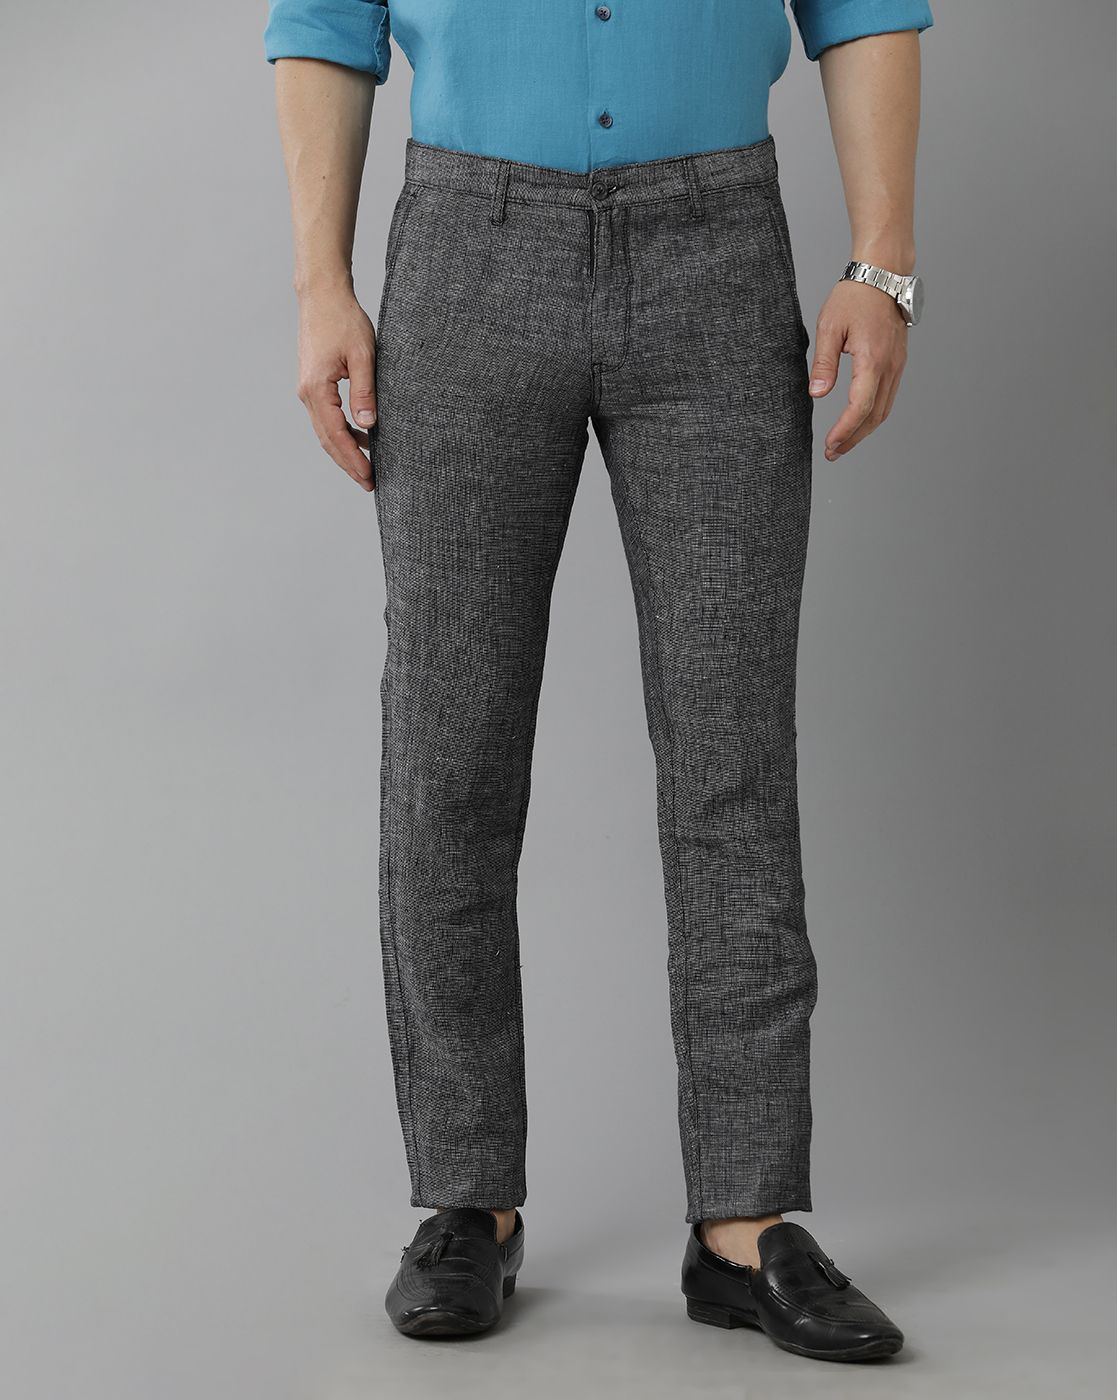 Grey Mens Comfortable Cotton Trousers in Rajkot at best price by Rado  Fashions - Justdial